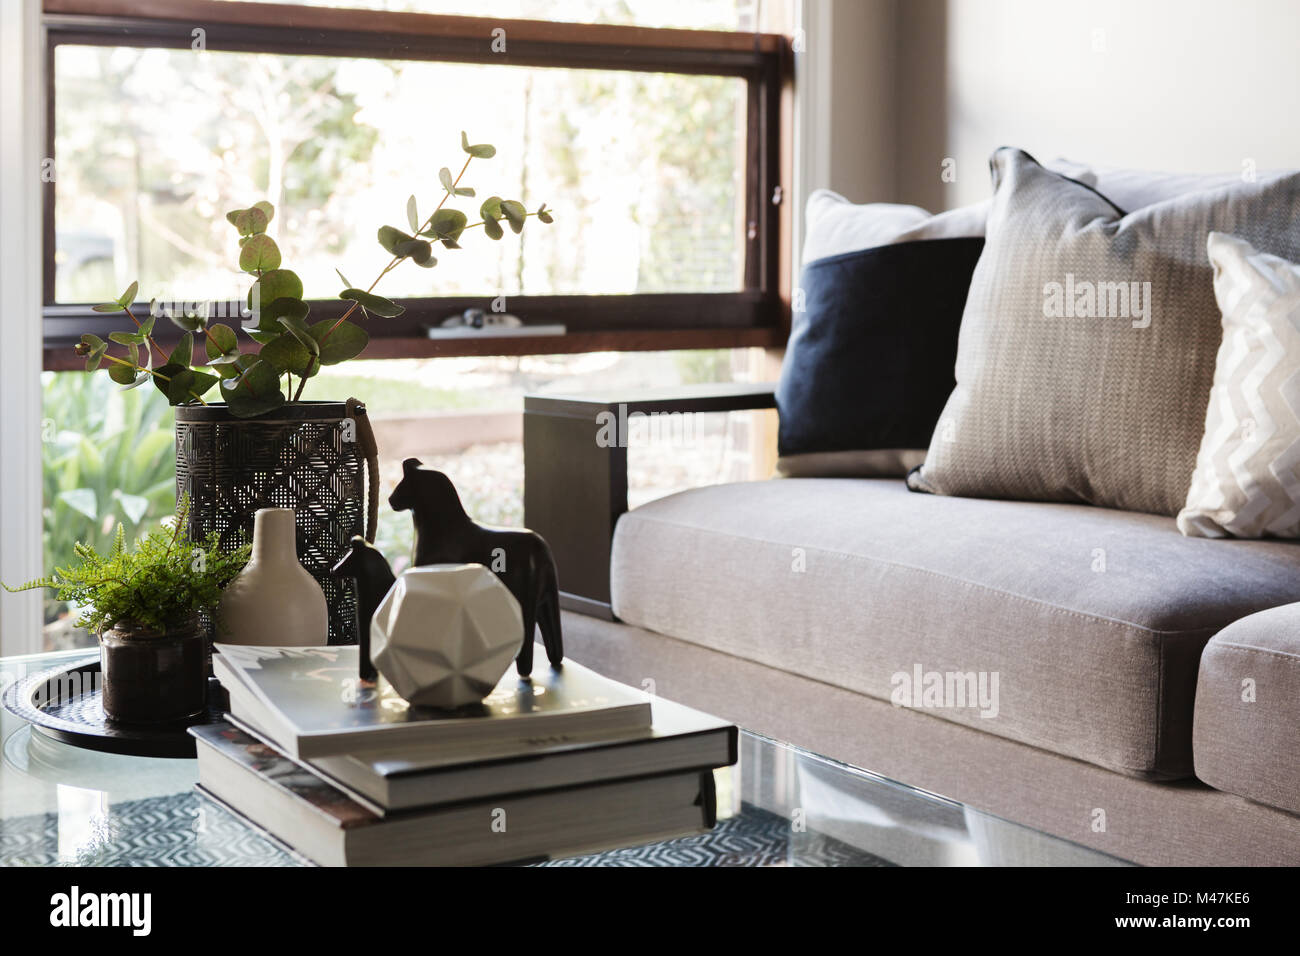 Contemporary luxury interior sofa and coffee table objects Stock Photo